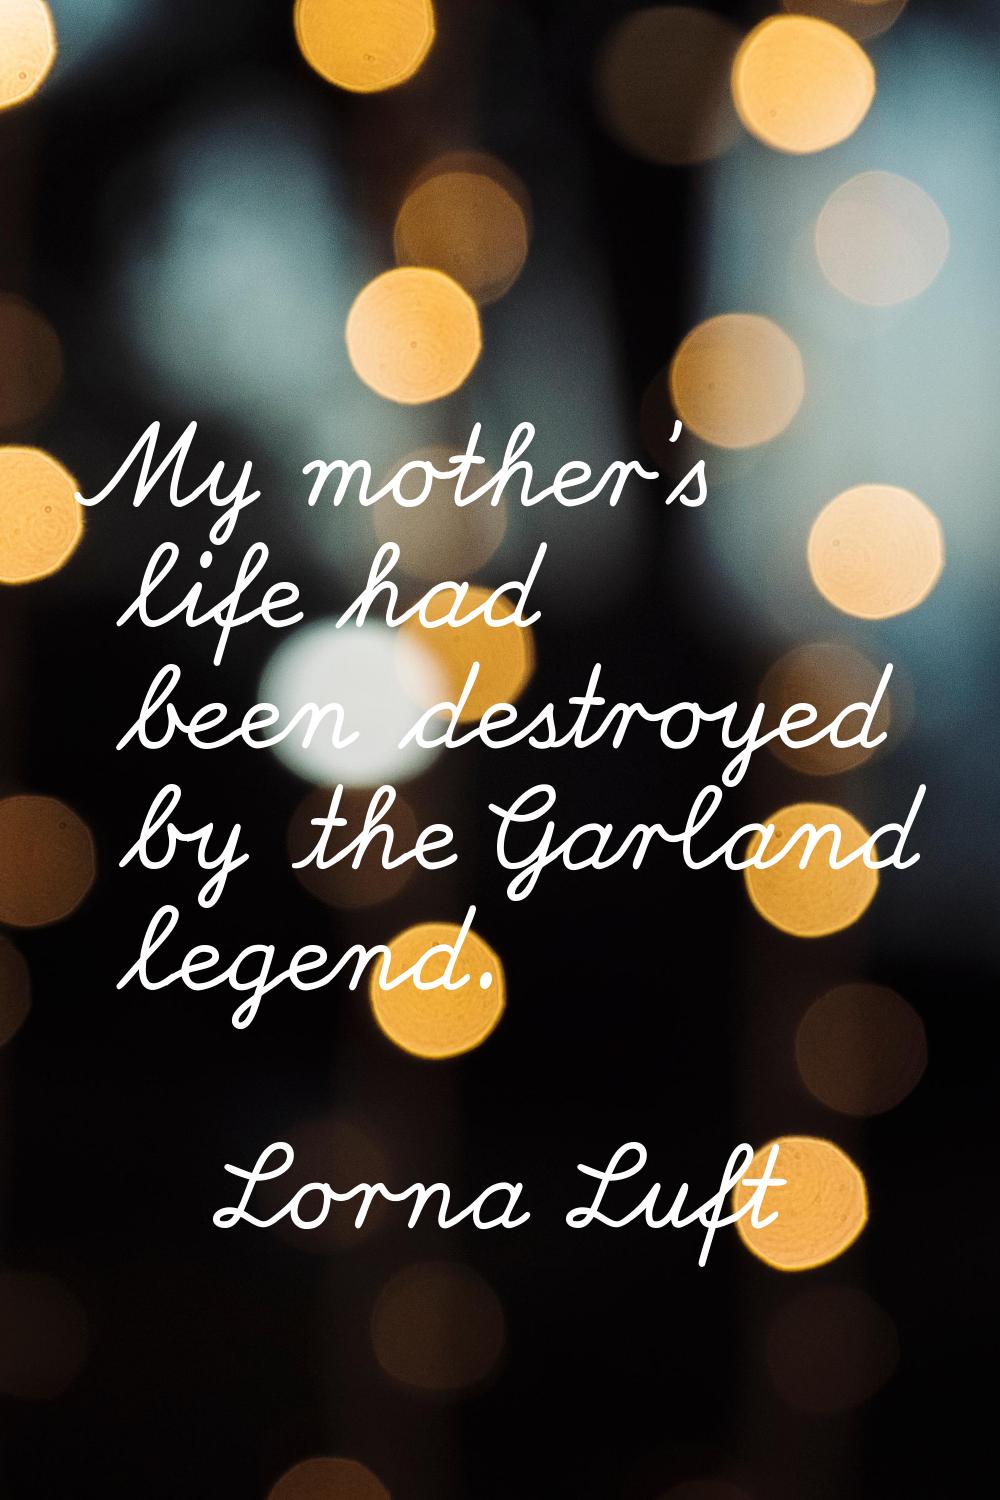 My mother's life had been destroyed by the Garland legend.